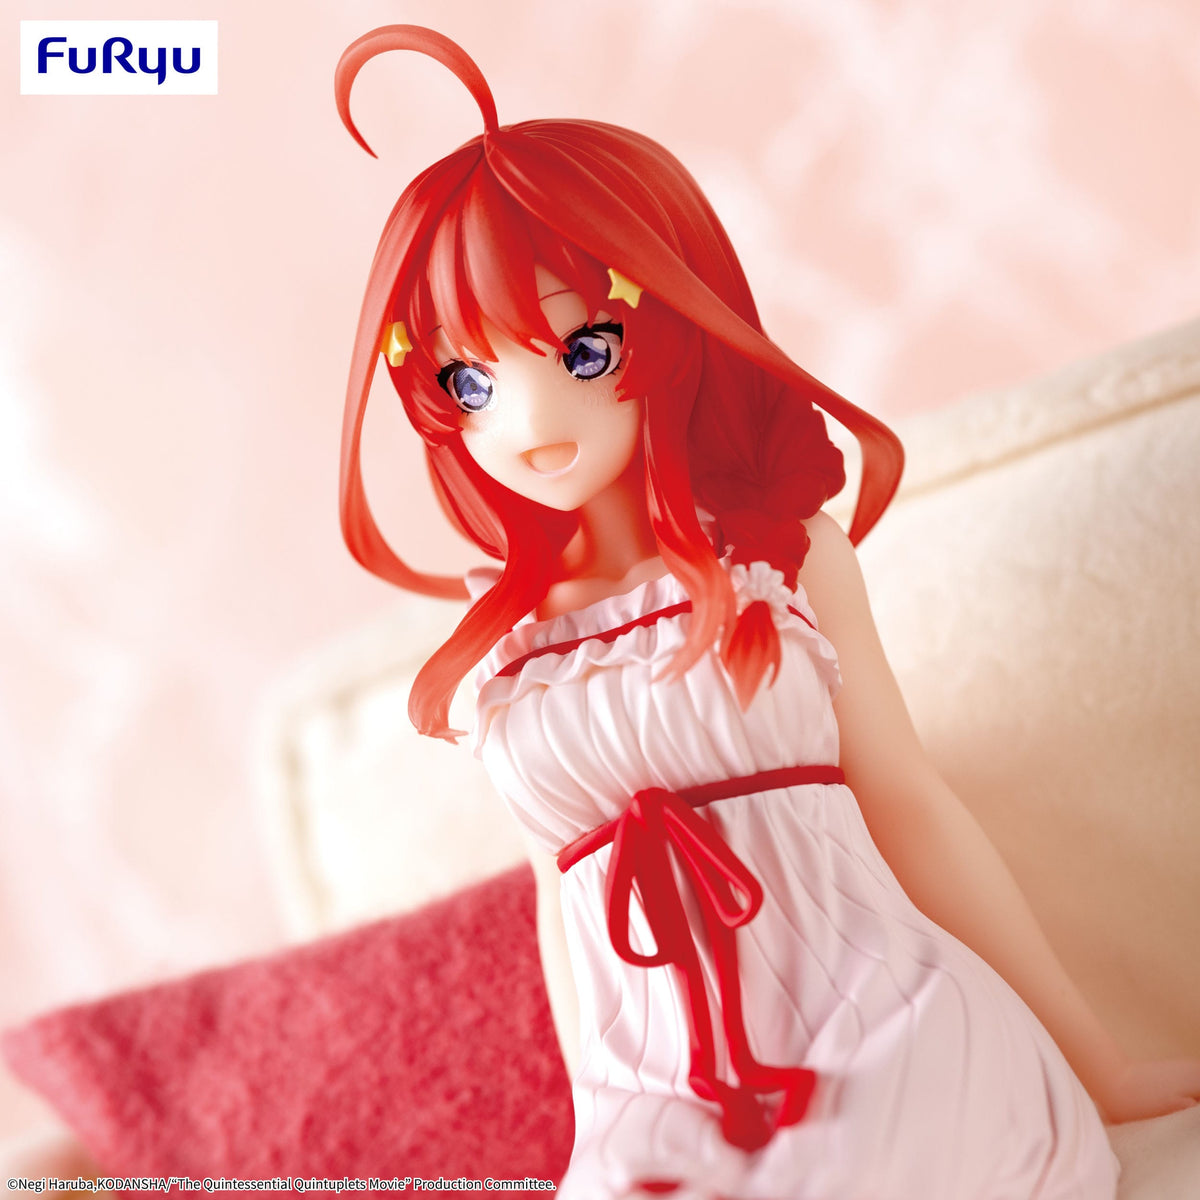 The Quintessential Quintuplets Movie - Itsuki Nakano - Loungewear Ver. Noodle stopper figure (Furyu)